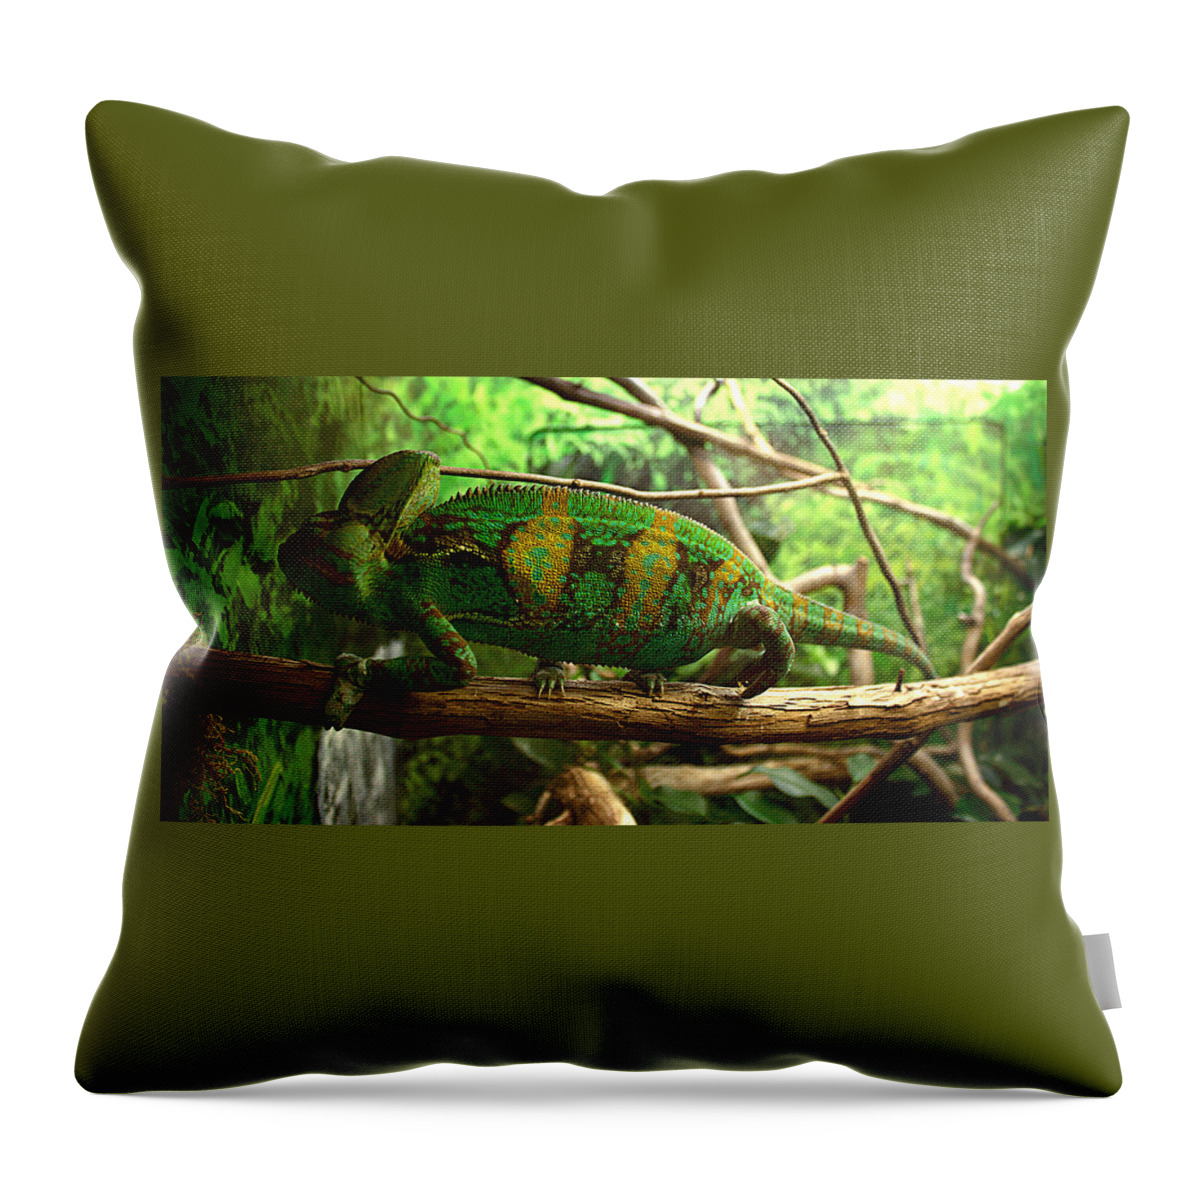 James Smullins Throw Pillow featuring the photograph Chameleon by James Smullins